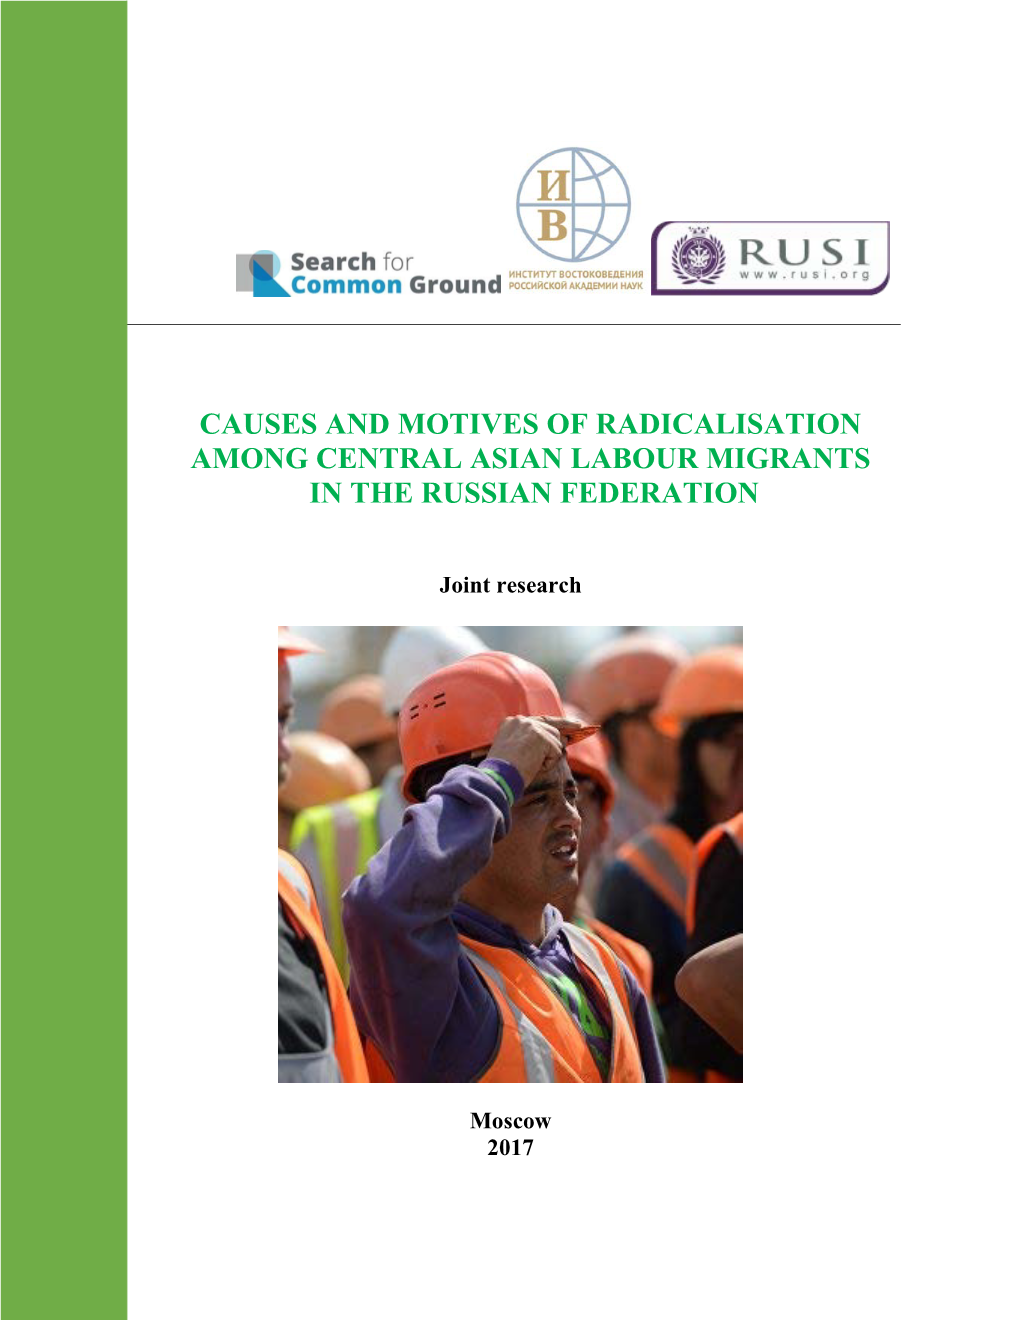 Causes and Motives of Radicalisation Among Central Asian Labour Migrants in the Russian Federation